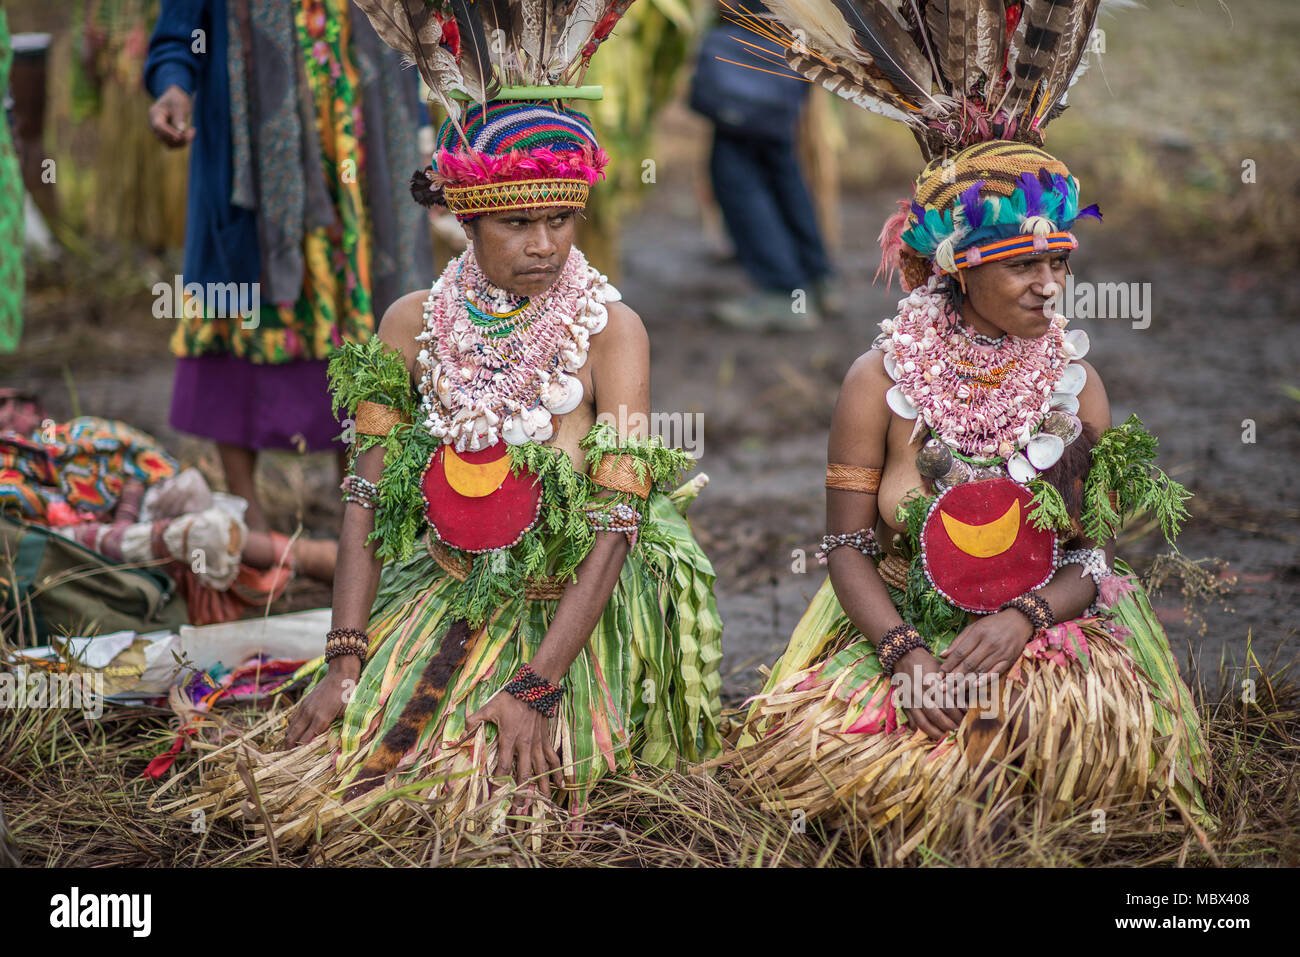 Two women in tratiditional costume, shell necklace and feathers headdress, Mount Hagen Cultural Show, Papua New Guinea Stock Photo